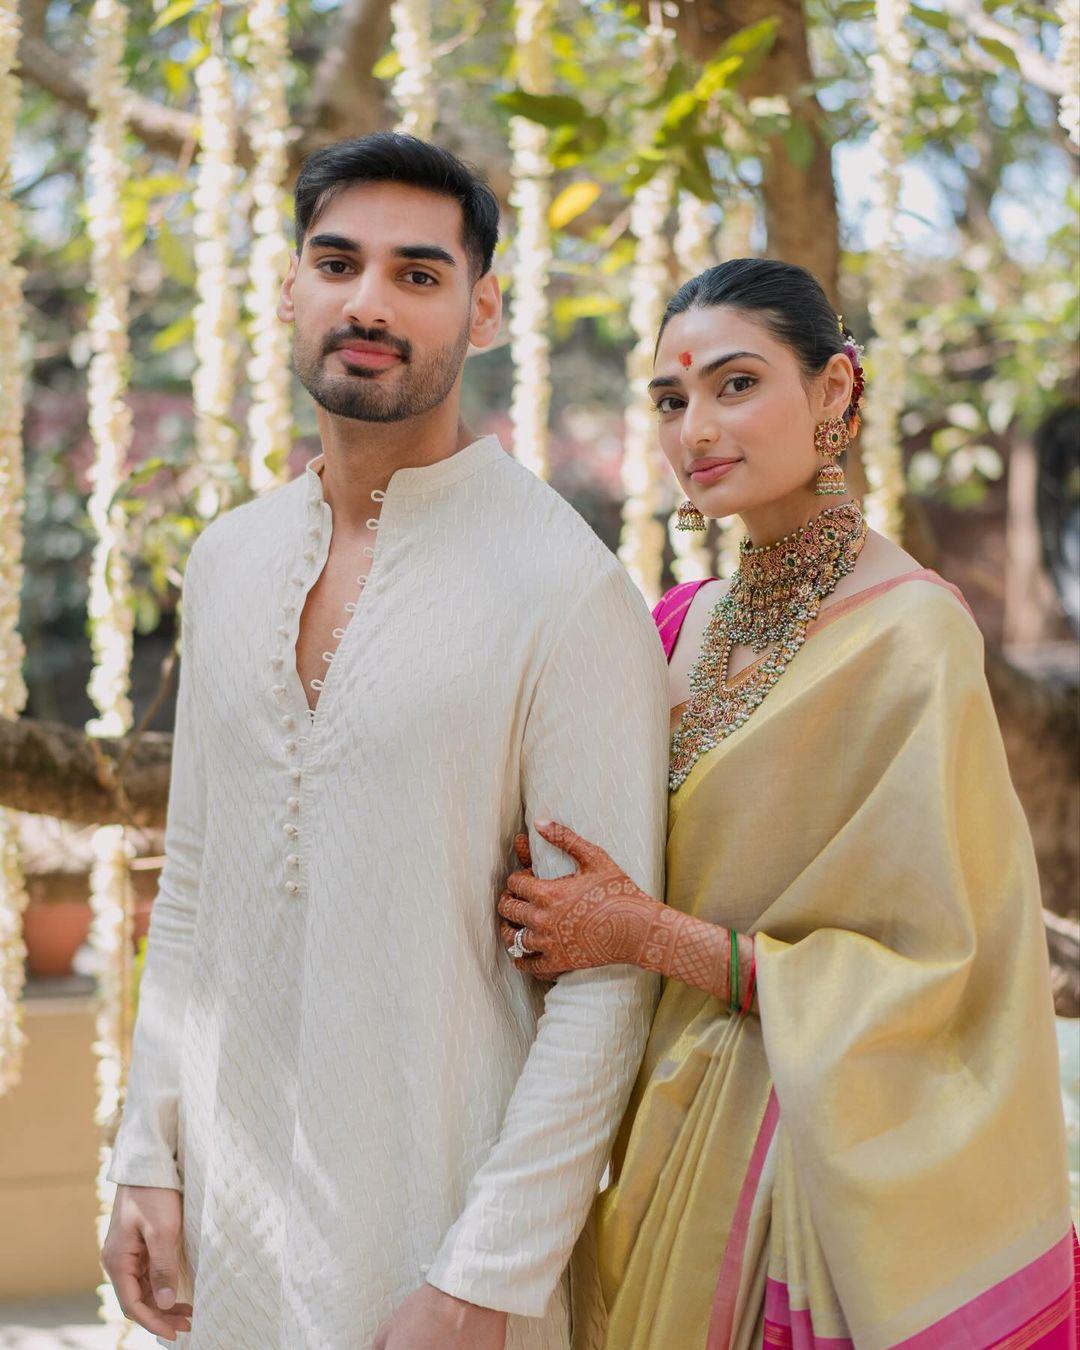 Athiya Shetty and Ahan Shetty often engage in cute Instagram banter. Recently, when Ahan wrote an emotional post for sister Athiya's birthday, the elder sister had the funniest comment; she said, 